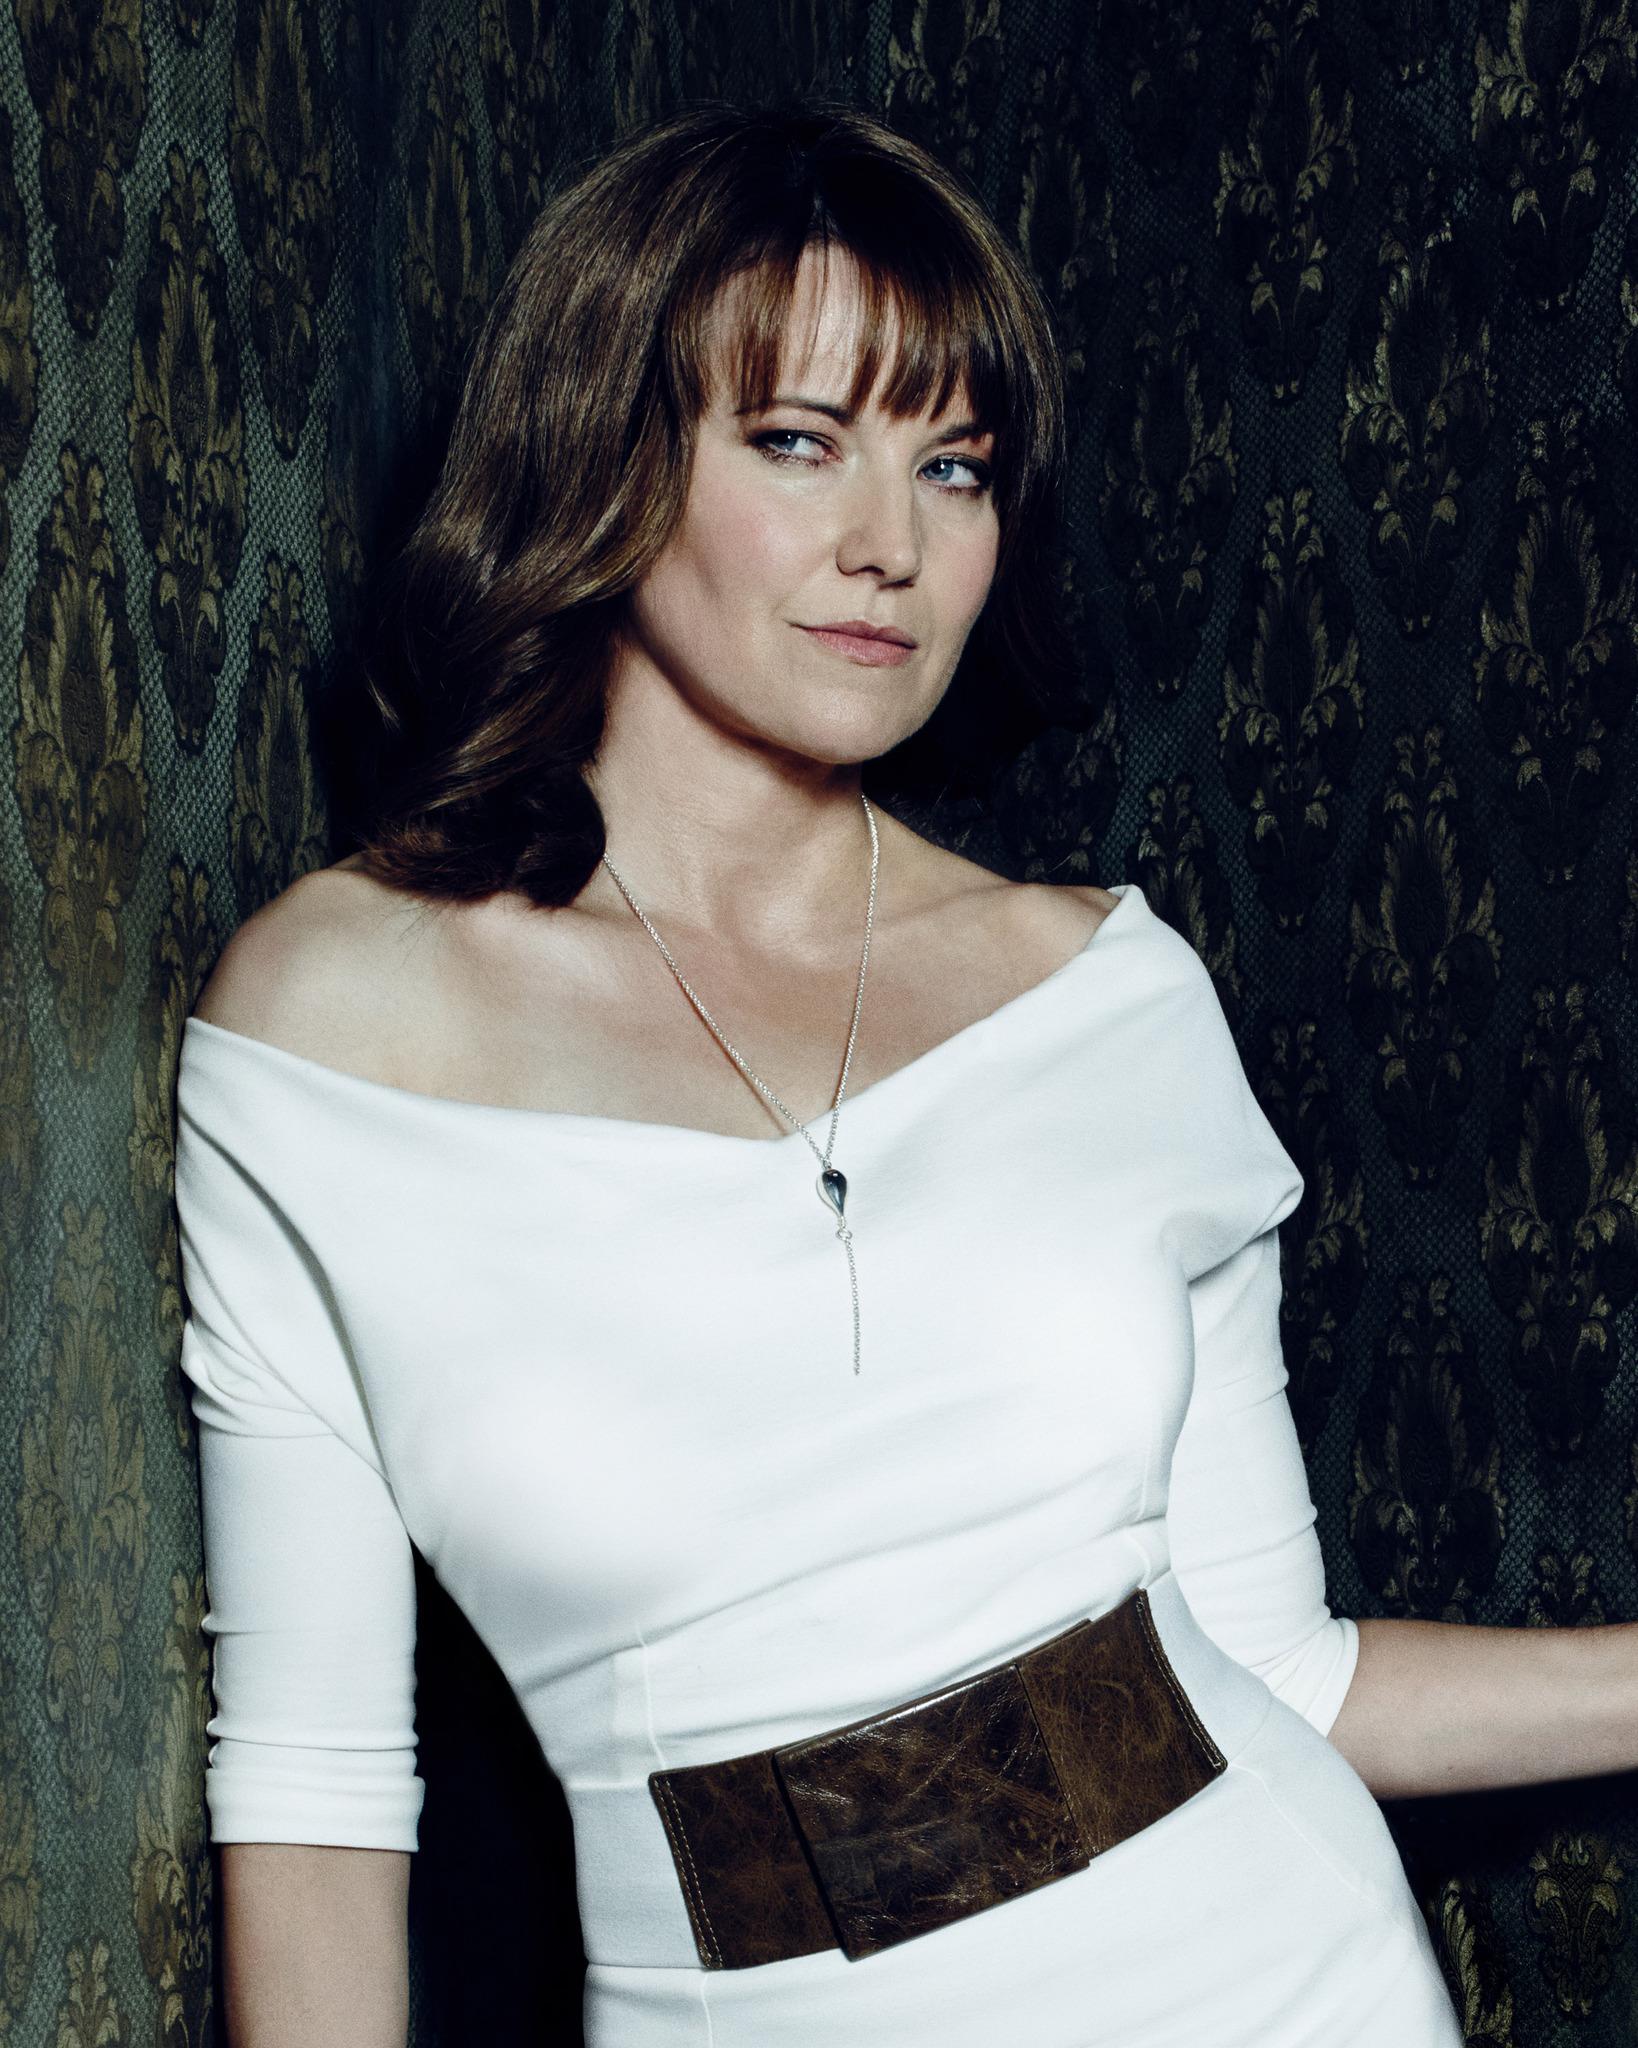 Lucy Lawless image